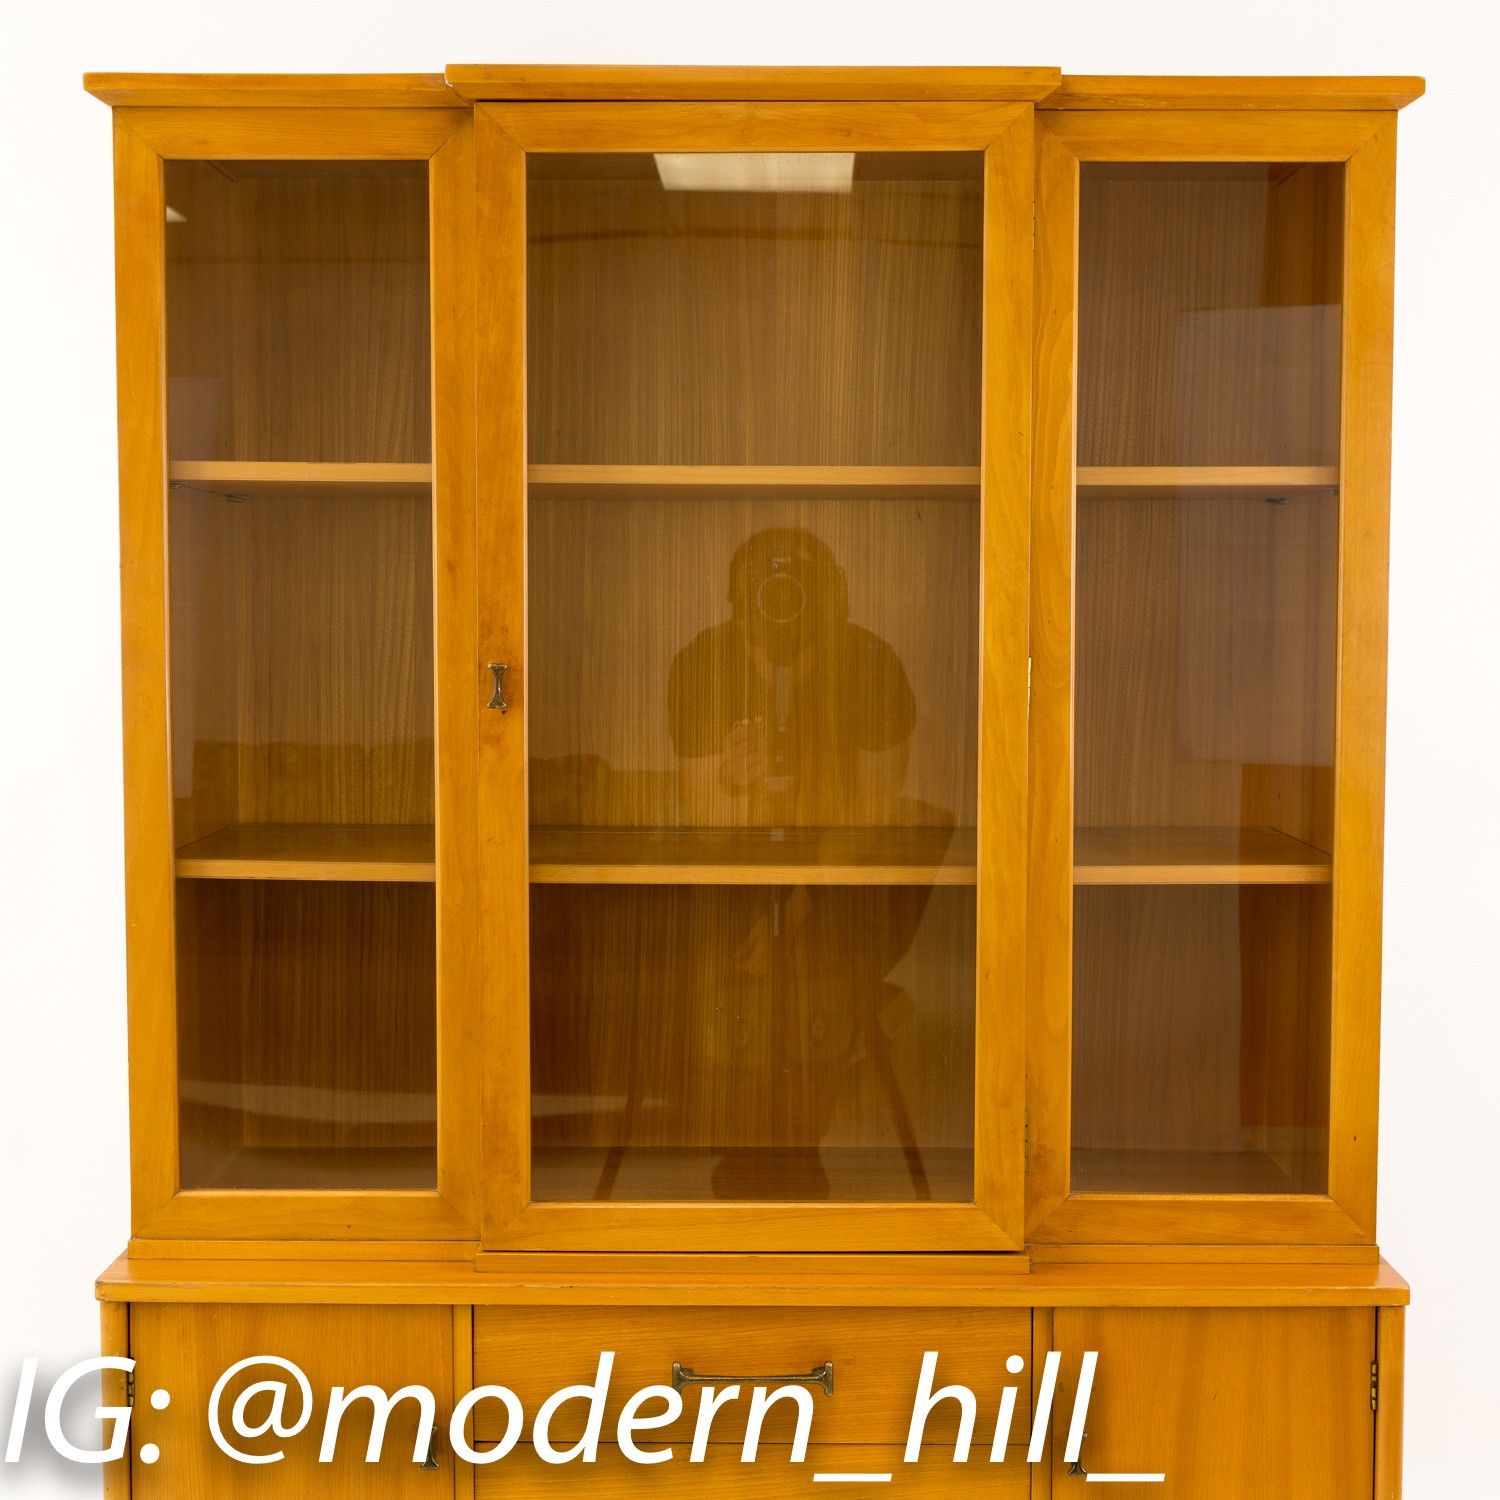 Milo Baughman for Drexel New Todays Living Spice Color China Cabinet